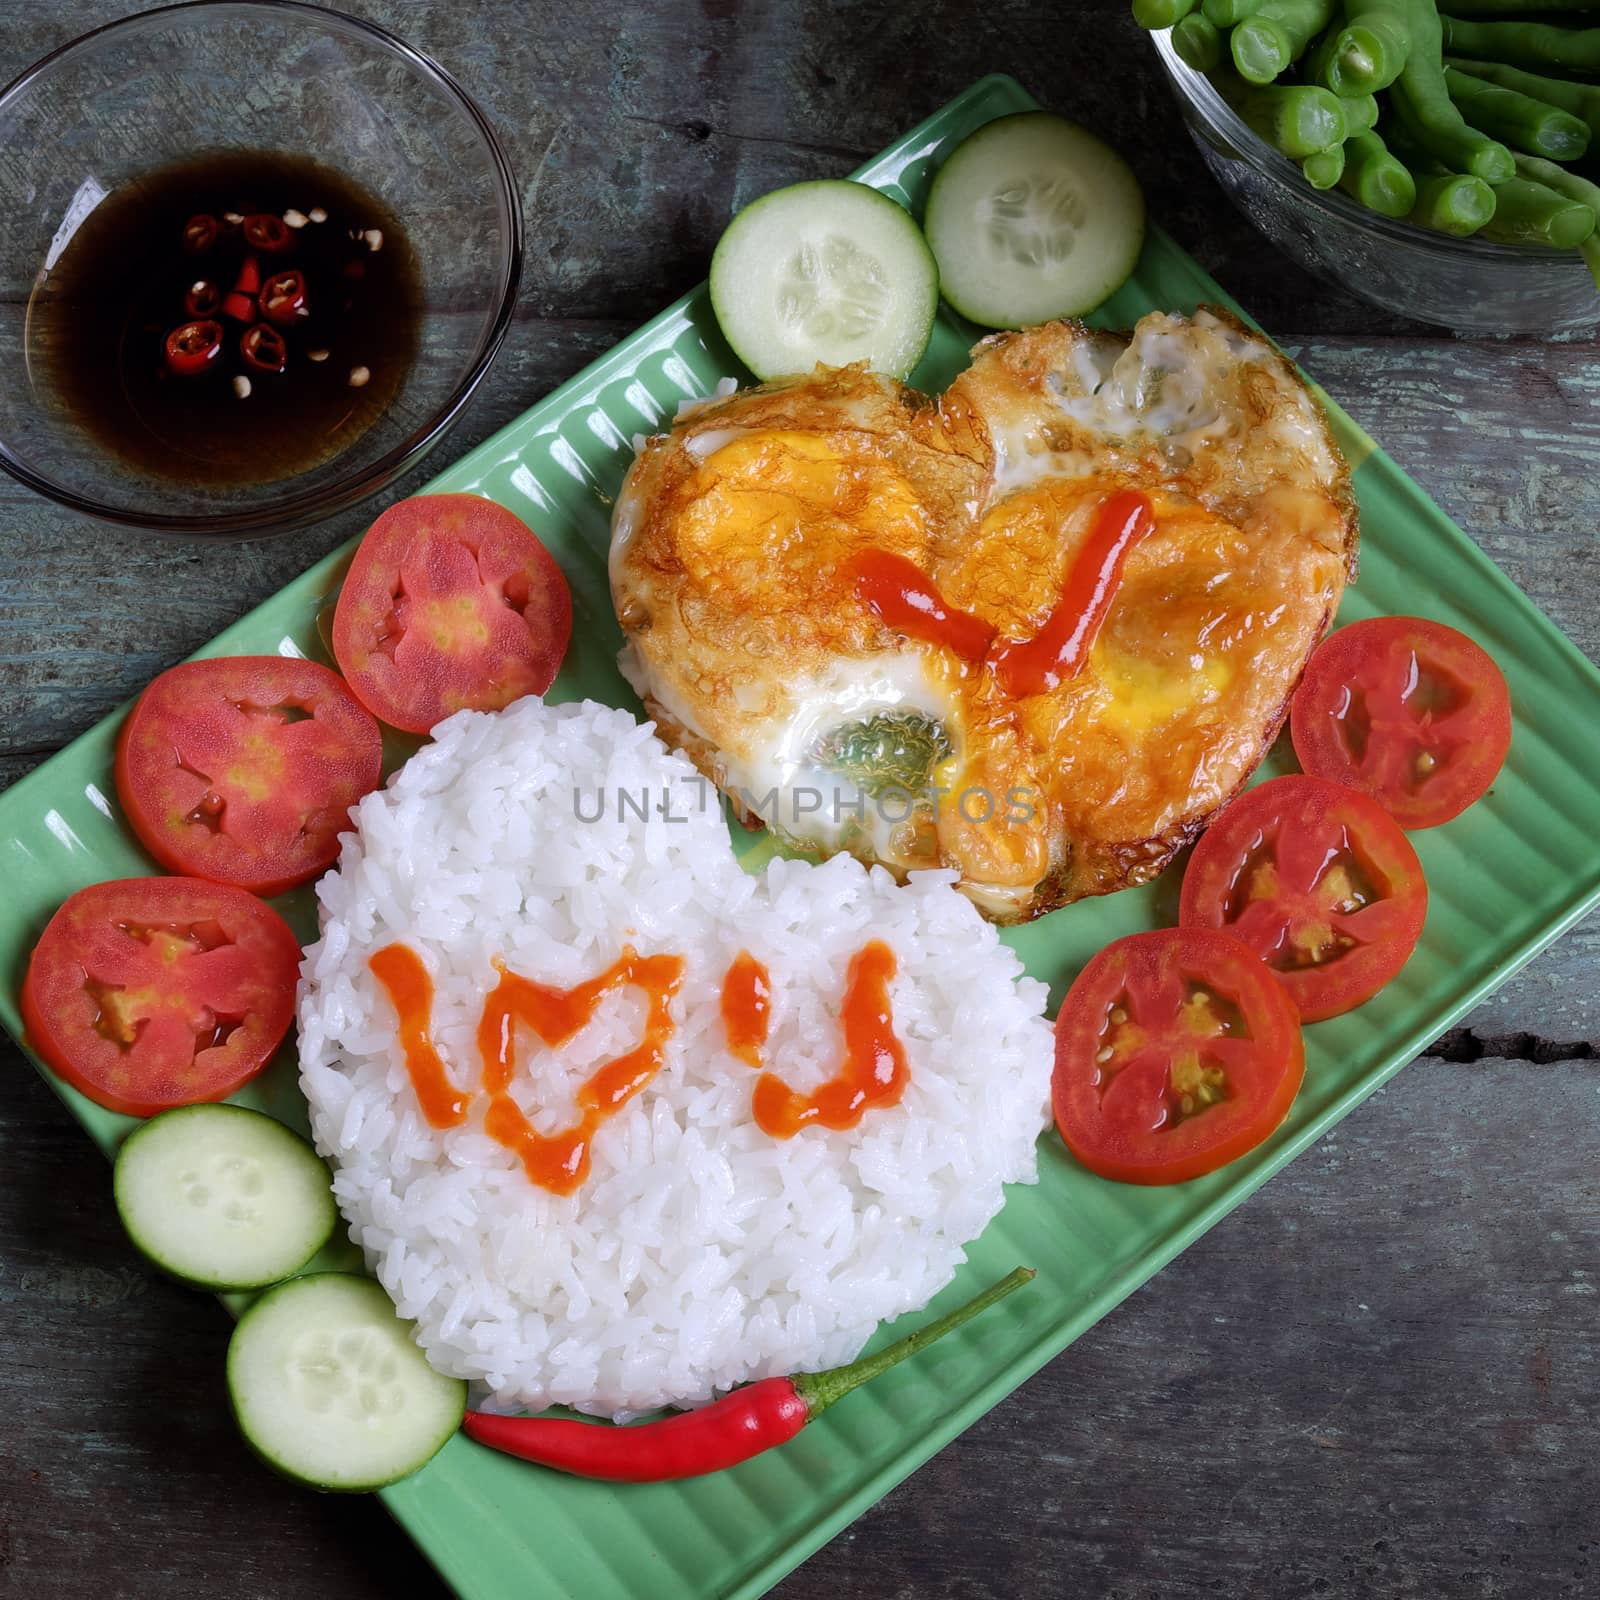 Vietnamese food, cooked rice, omelet, Valentine day by xuanhuongho